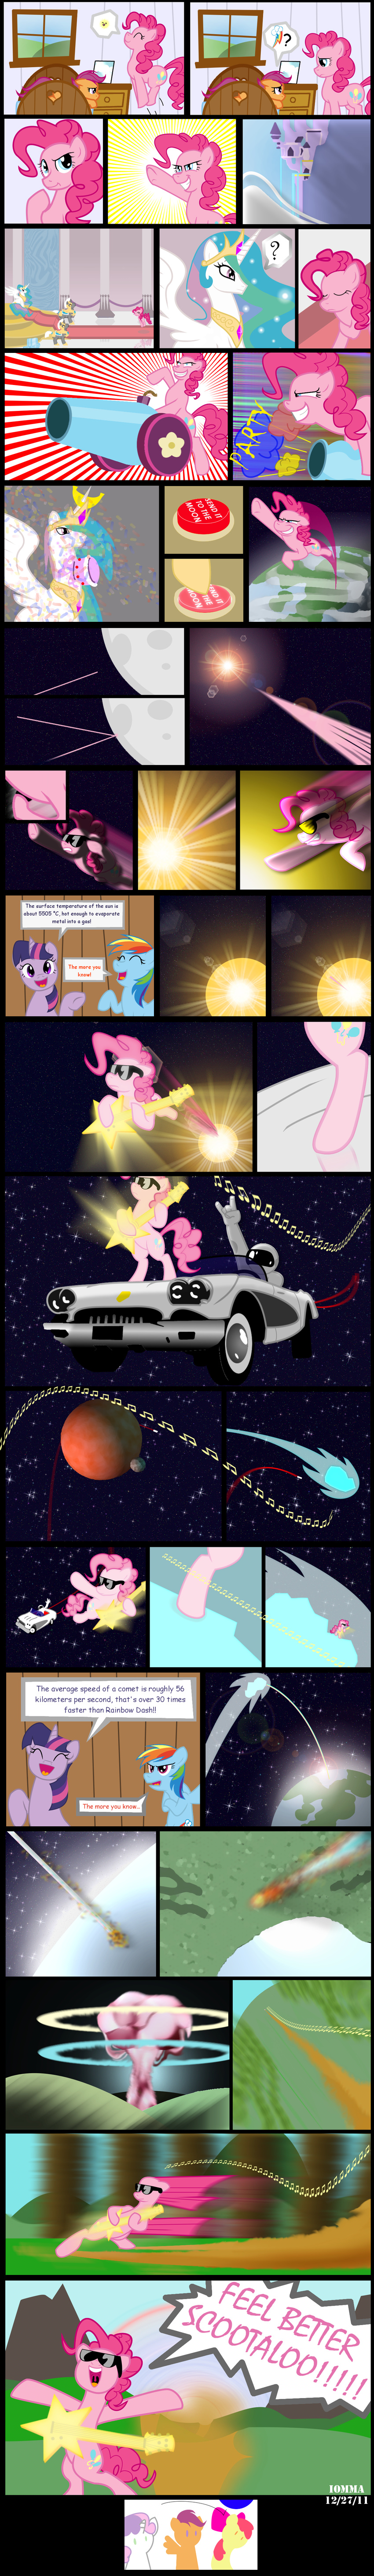 alicorn apple_bloom_(mlp) applebloom_(mlp) ball banana because_f*ck_yea! cannon canon car comic crown cub cutie_mark cutie_mark_crusaders_(mlp) dialog dialogue english_text equine explosion explotion female feral friendship_is_magic fruit group guitar hair horn horse iomma long_hair mammal meteor moon multi-colored_hair multi_color_hair music my_little_pony pegasus pink_hair pink_haor pinkie_pie_(mlp) pony princess_celestia_(mlp) rainbow_dash_(mlp) rainbow_hair scootaloo_(mlp) short_hair space sun sweetie_belle_(mlp) tail text to_the_moon twilight_sparkle_(mlp) two_tone_hair unicorn winged_unicorn wings young